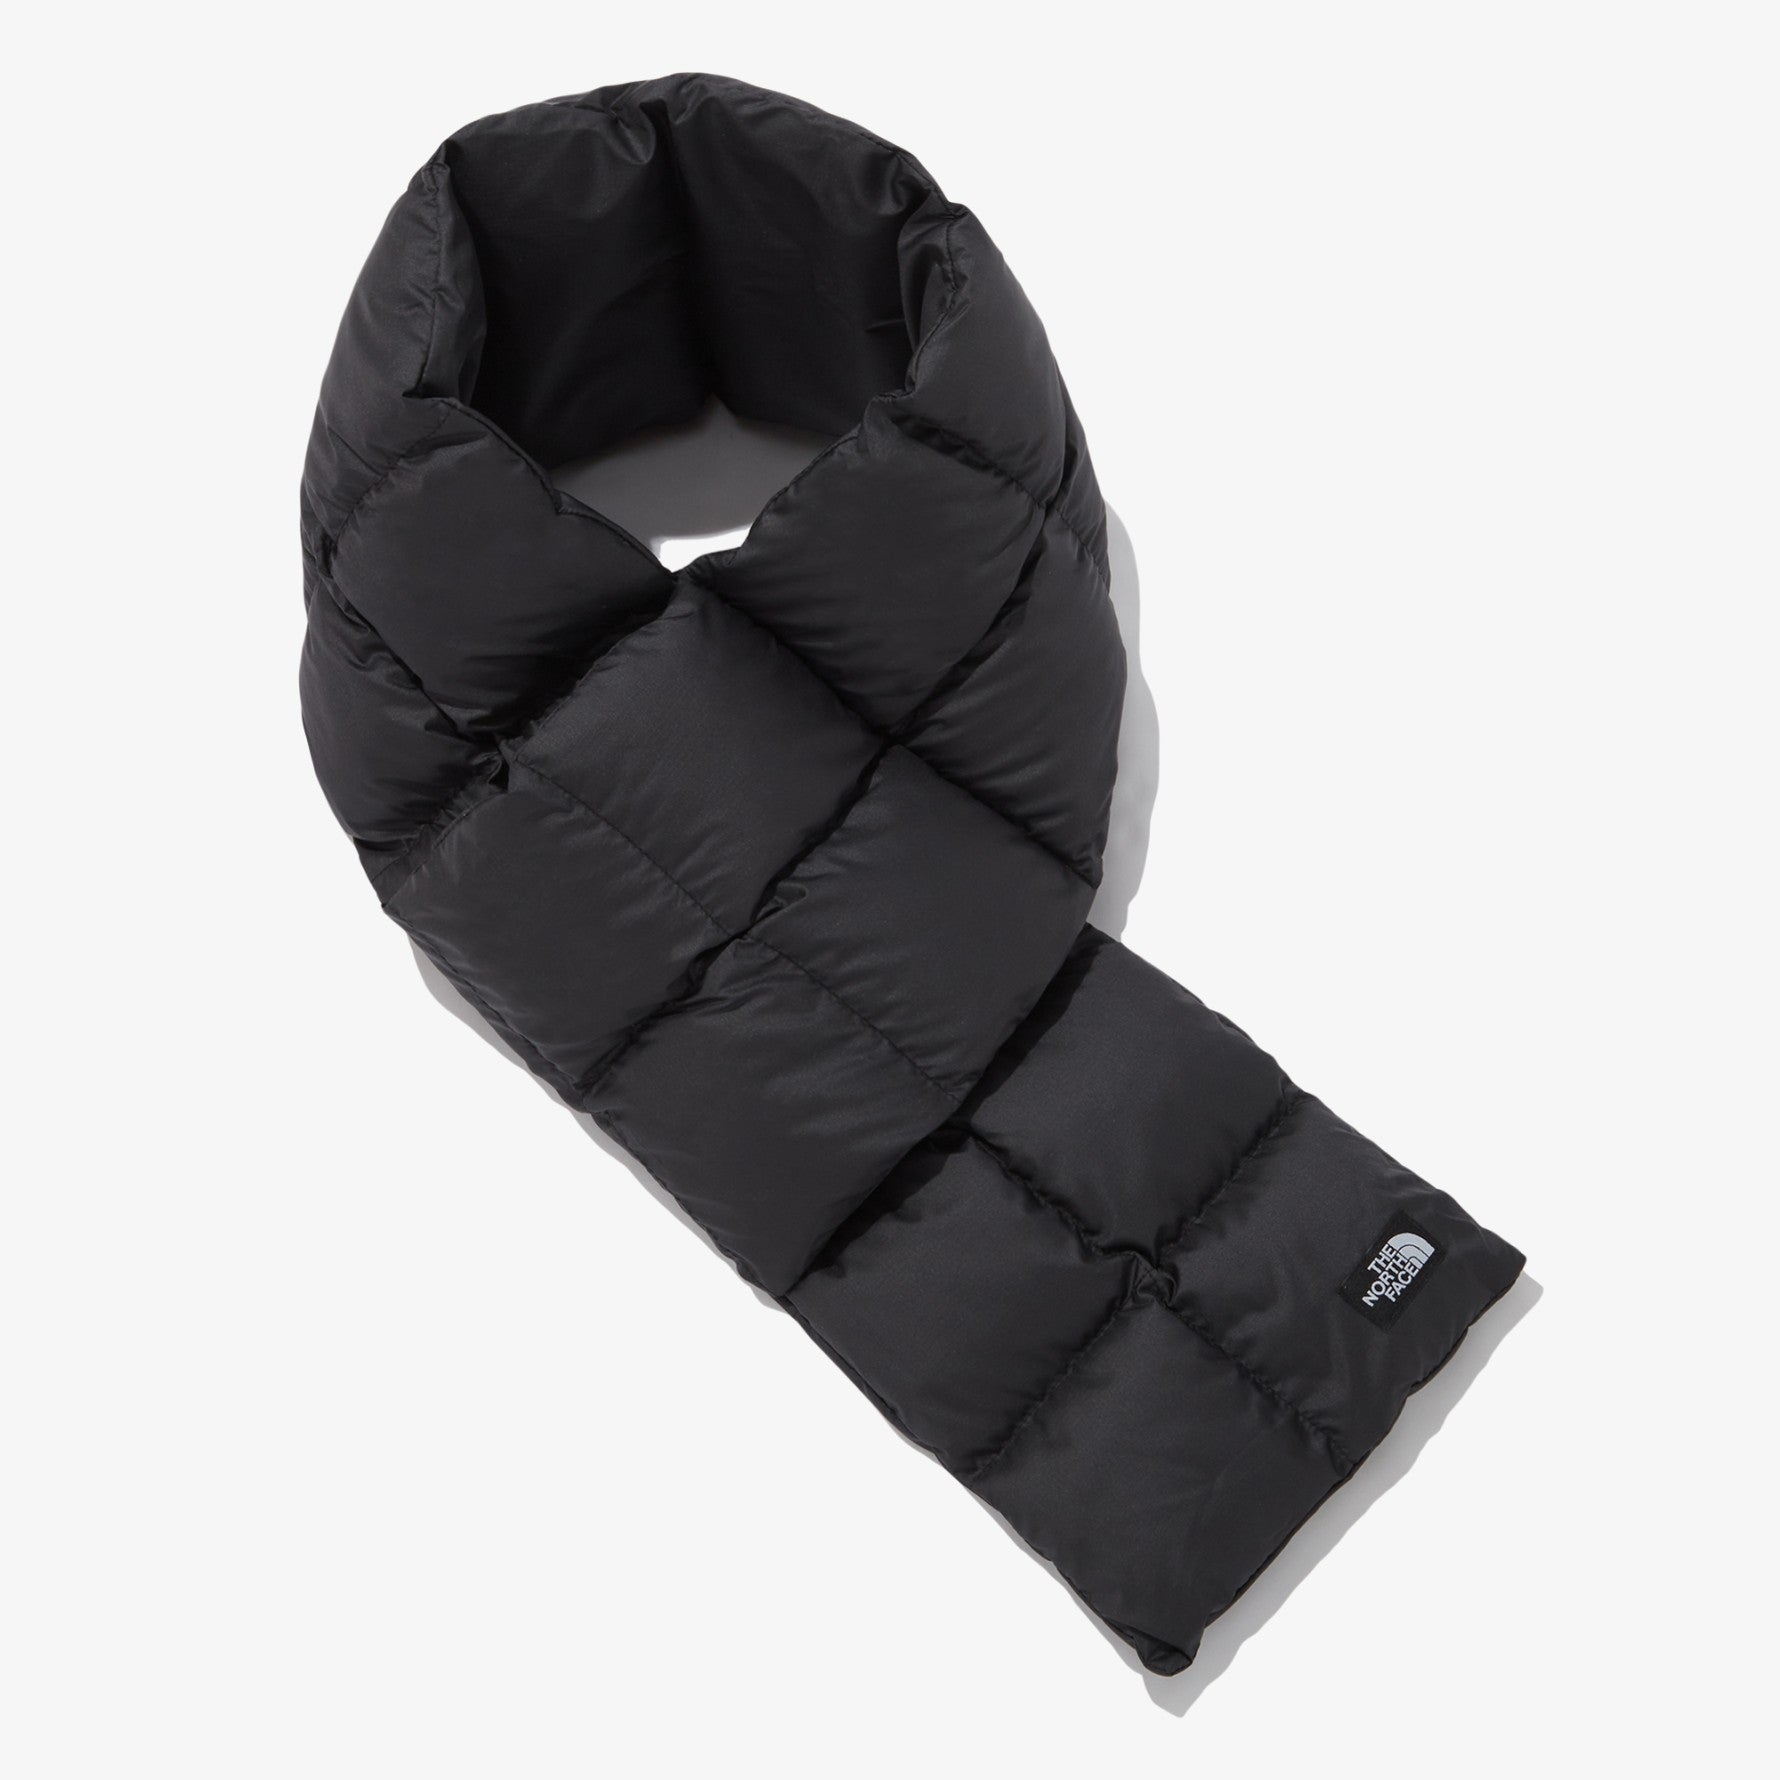 [THE NORTH FACE] PACKABLE T-BALL MUFFLER _ BLACK (NA5IP51A) - コクモト KOCUMOTO